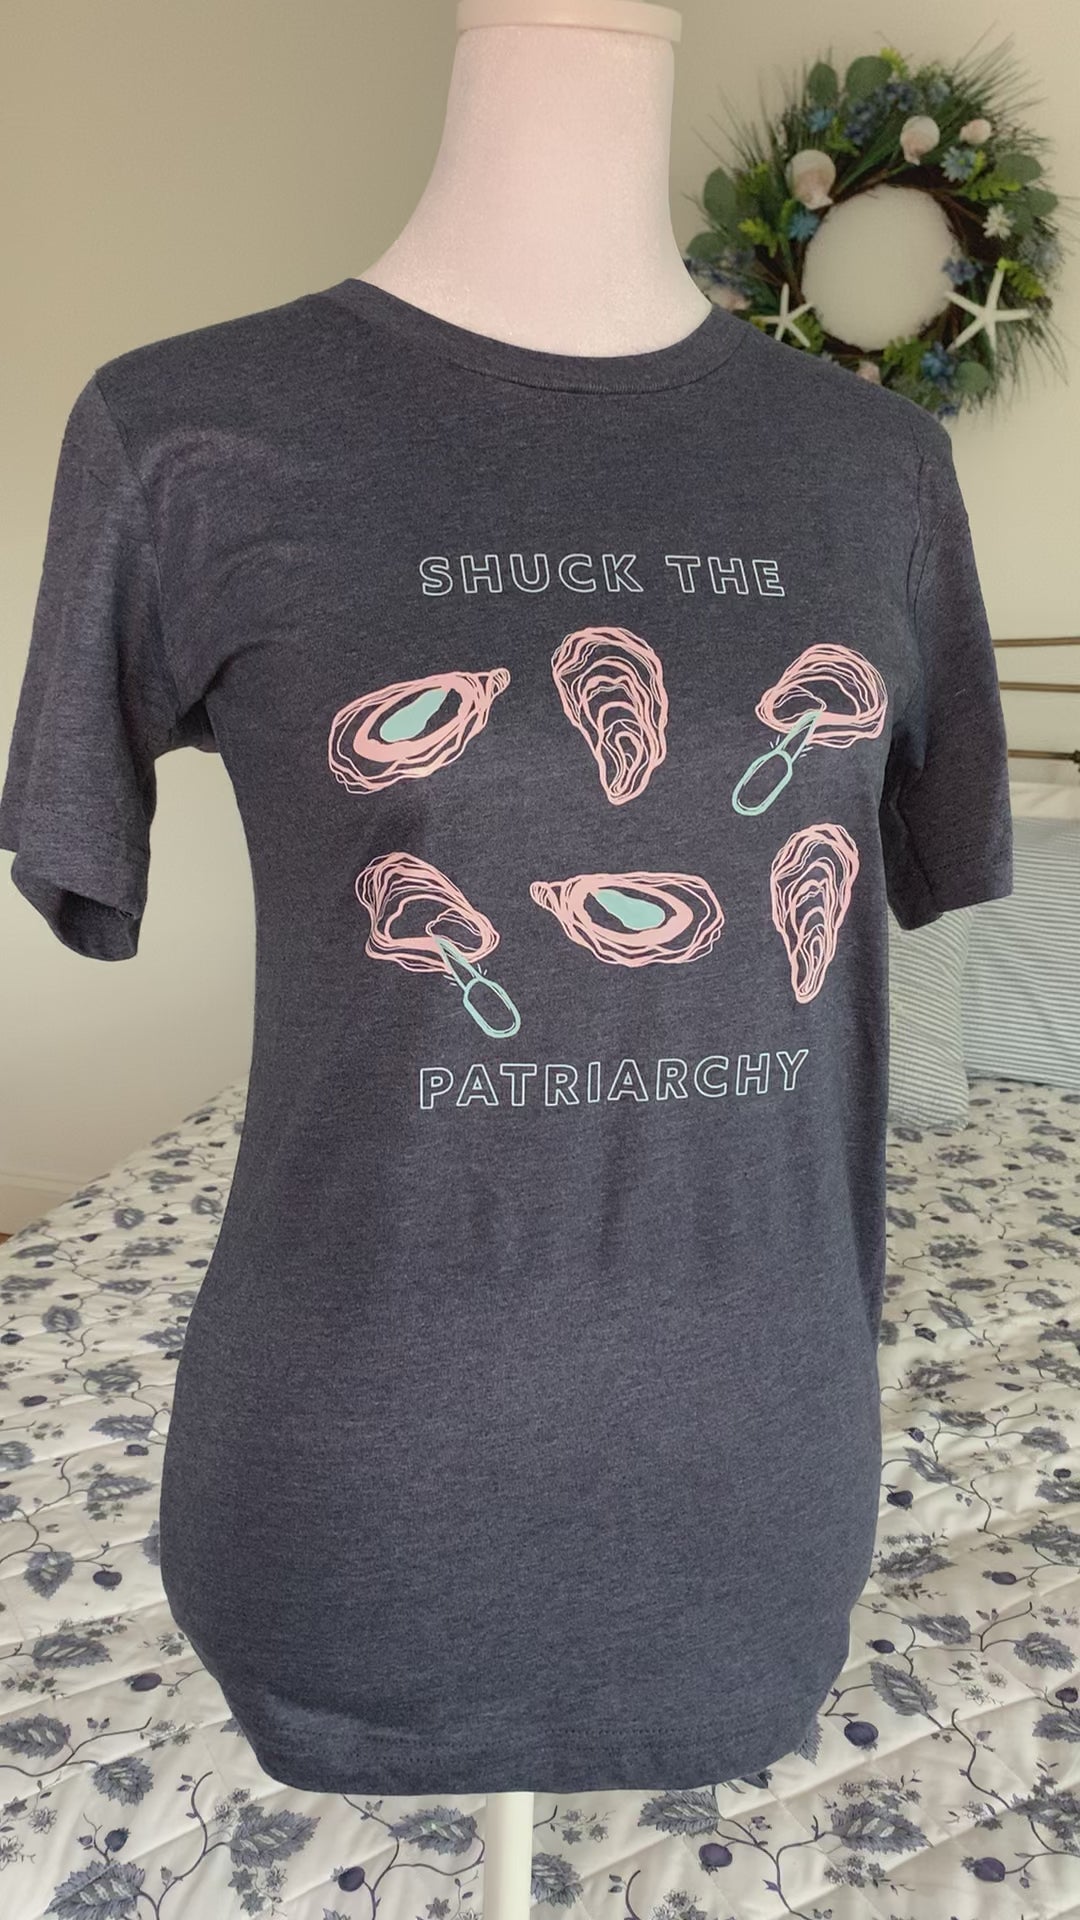 A heather navy tee that reads "Shuck the Patriarchy" hangs on a manikin